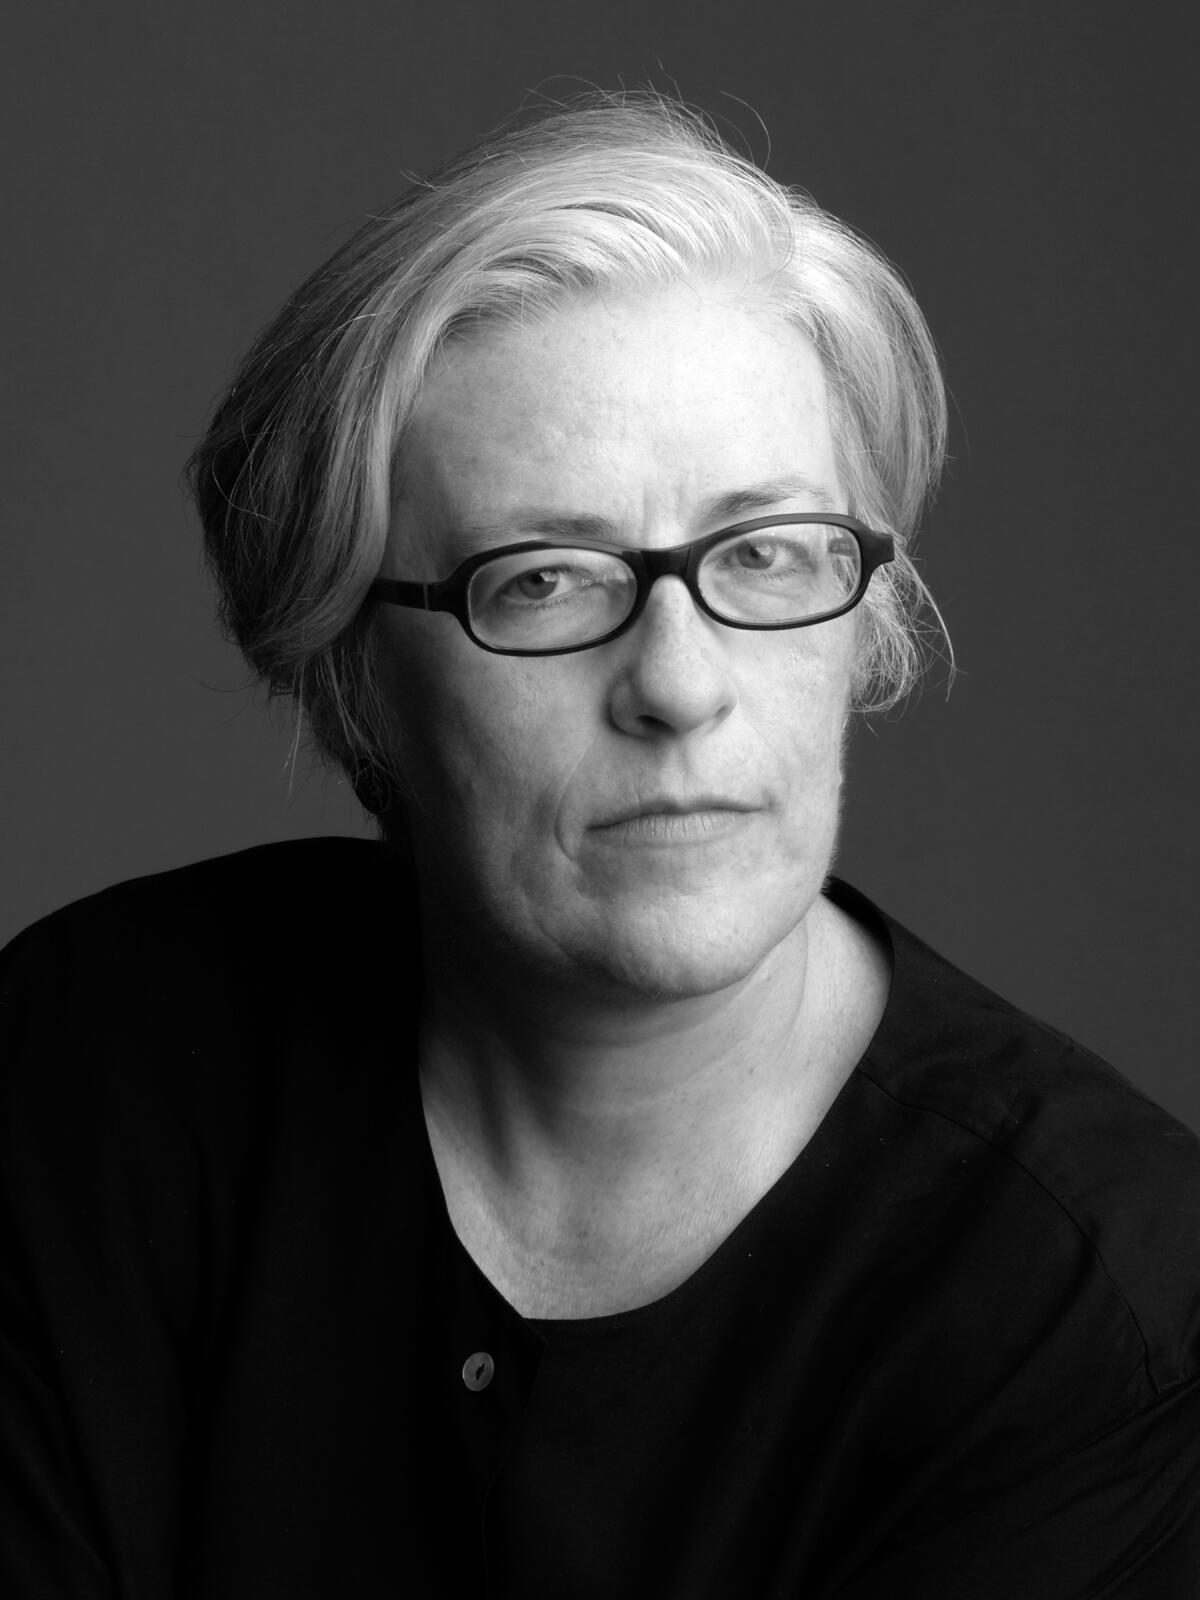 A black-and-white headshot of Cynthia Carr, with short hair, glasses and a black shirt.